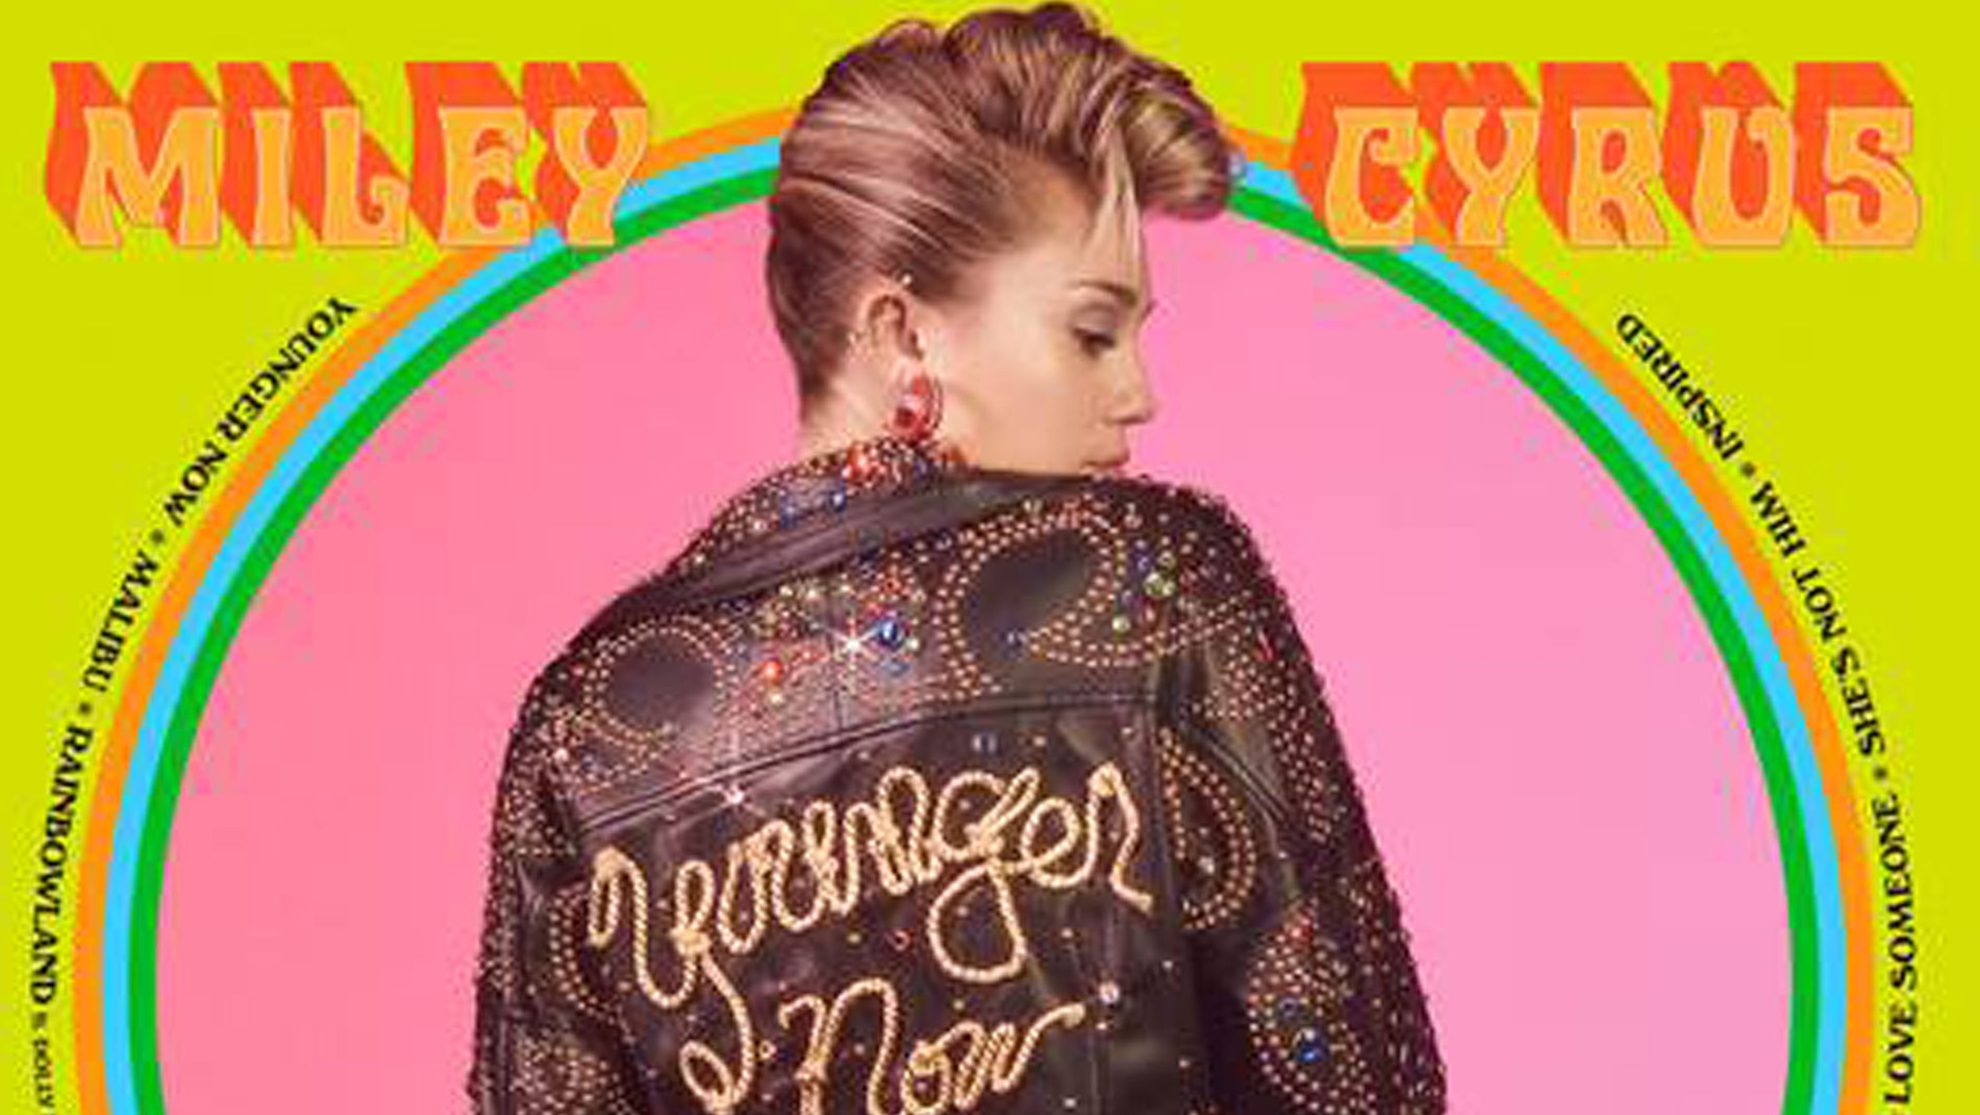 Miley Cyrus 'Younger Now'